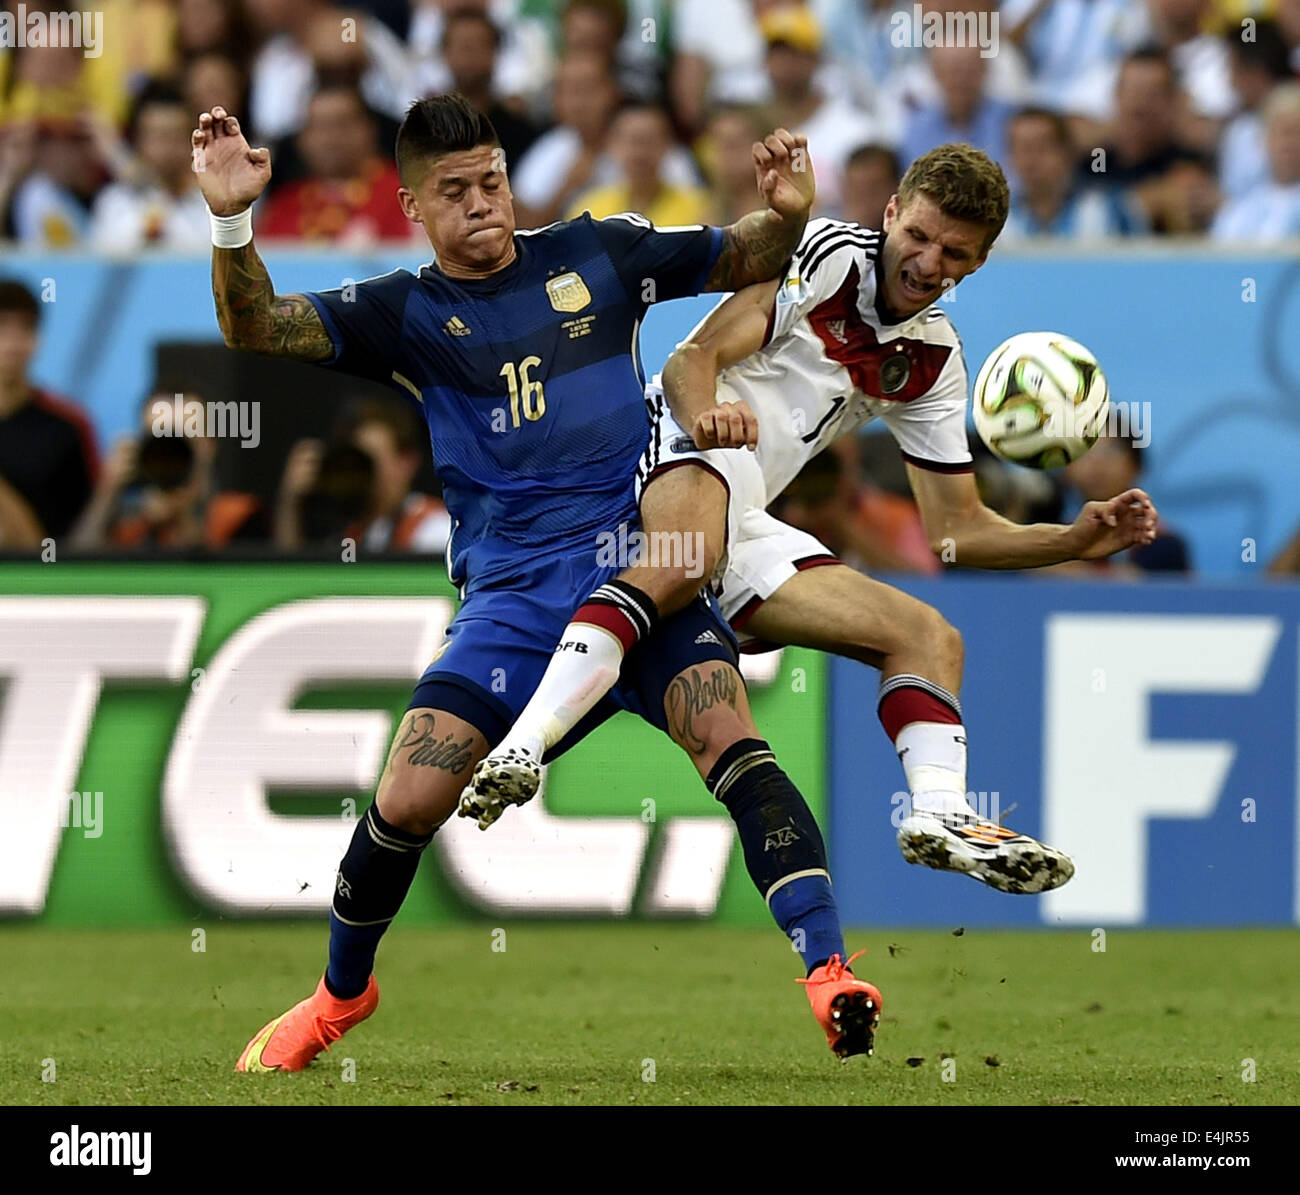 Rio De Janeiro, Brazil. 13th July, 2014. Germany's Thomas Muller (R) vies with Argentina's Marcos Rojo during the final match between Germany and Argentina of 2014 FIFA World Cup at the Estadio do Maracana Stadium in Rio de Janeiro, Brazil, on July 13, 2014. Credit:  Qi Heng/Xinhua/Alamy Live News Stock Photo